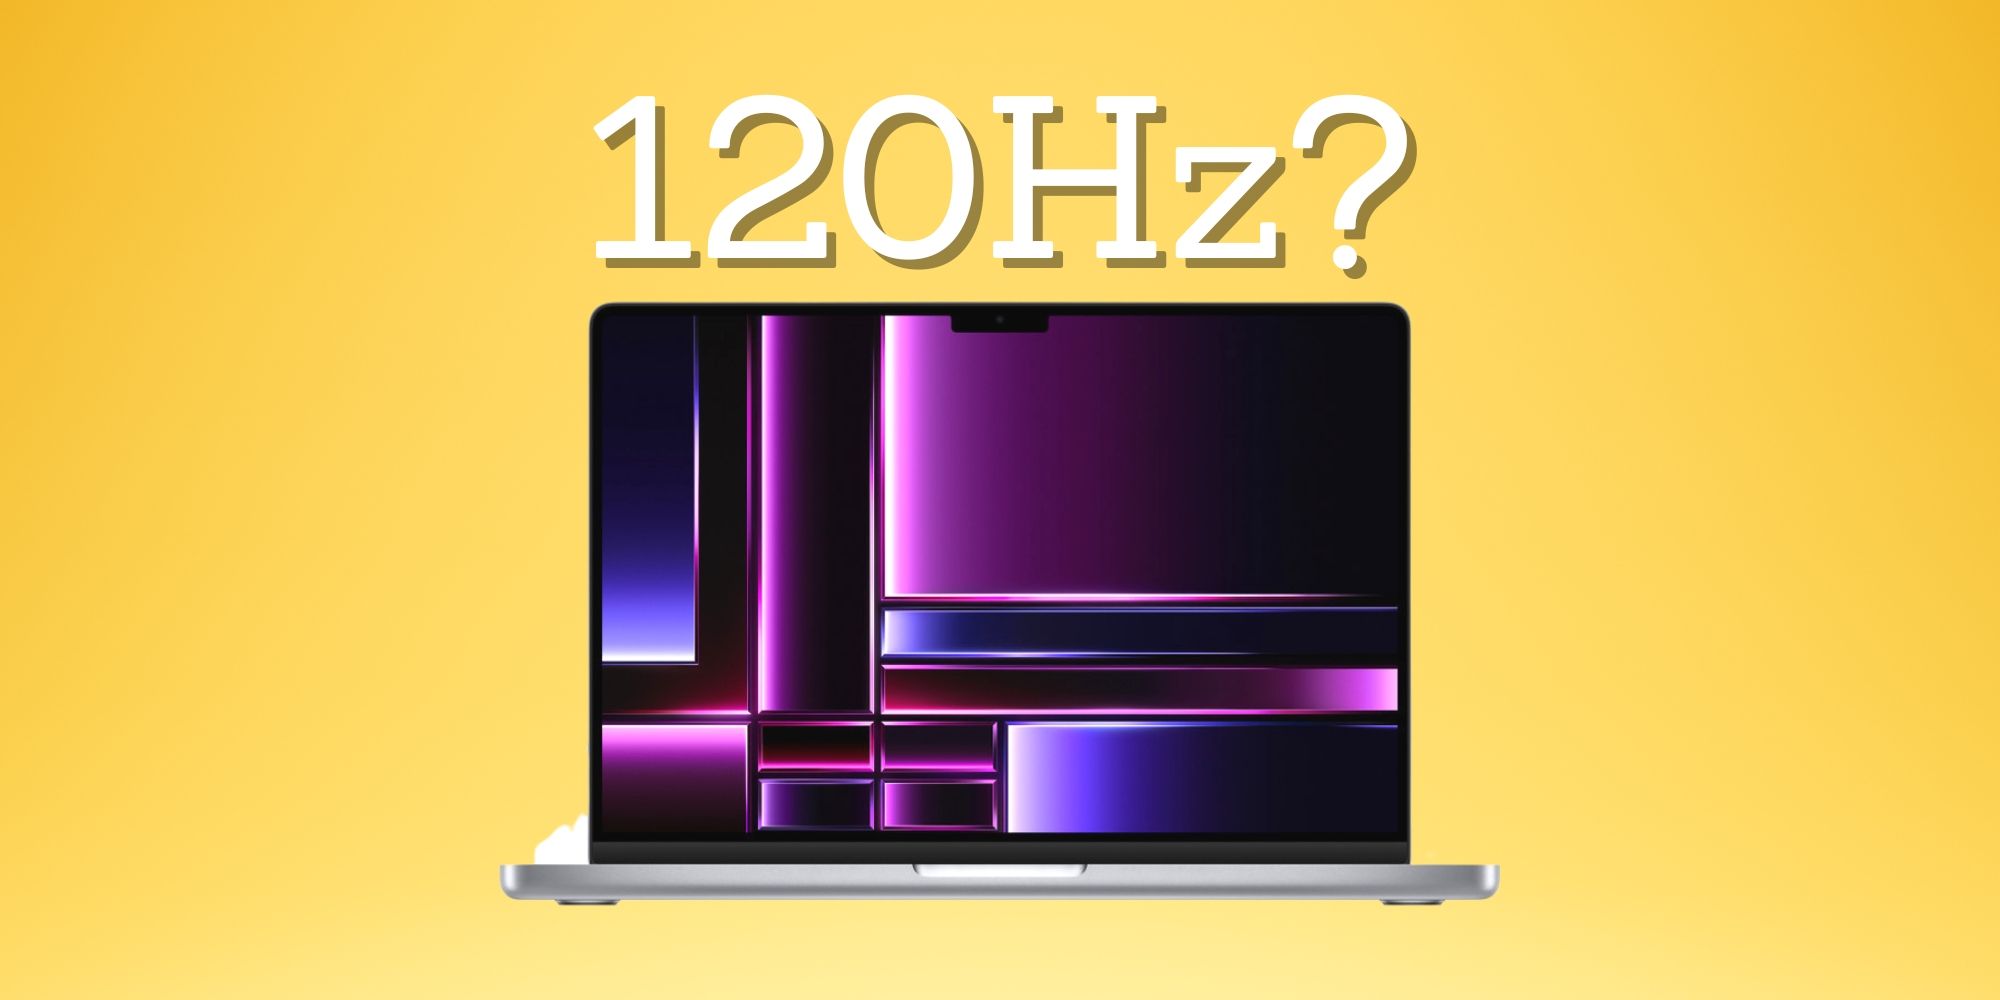 MacBook Pro with 120Hz written on top over a yellow background